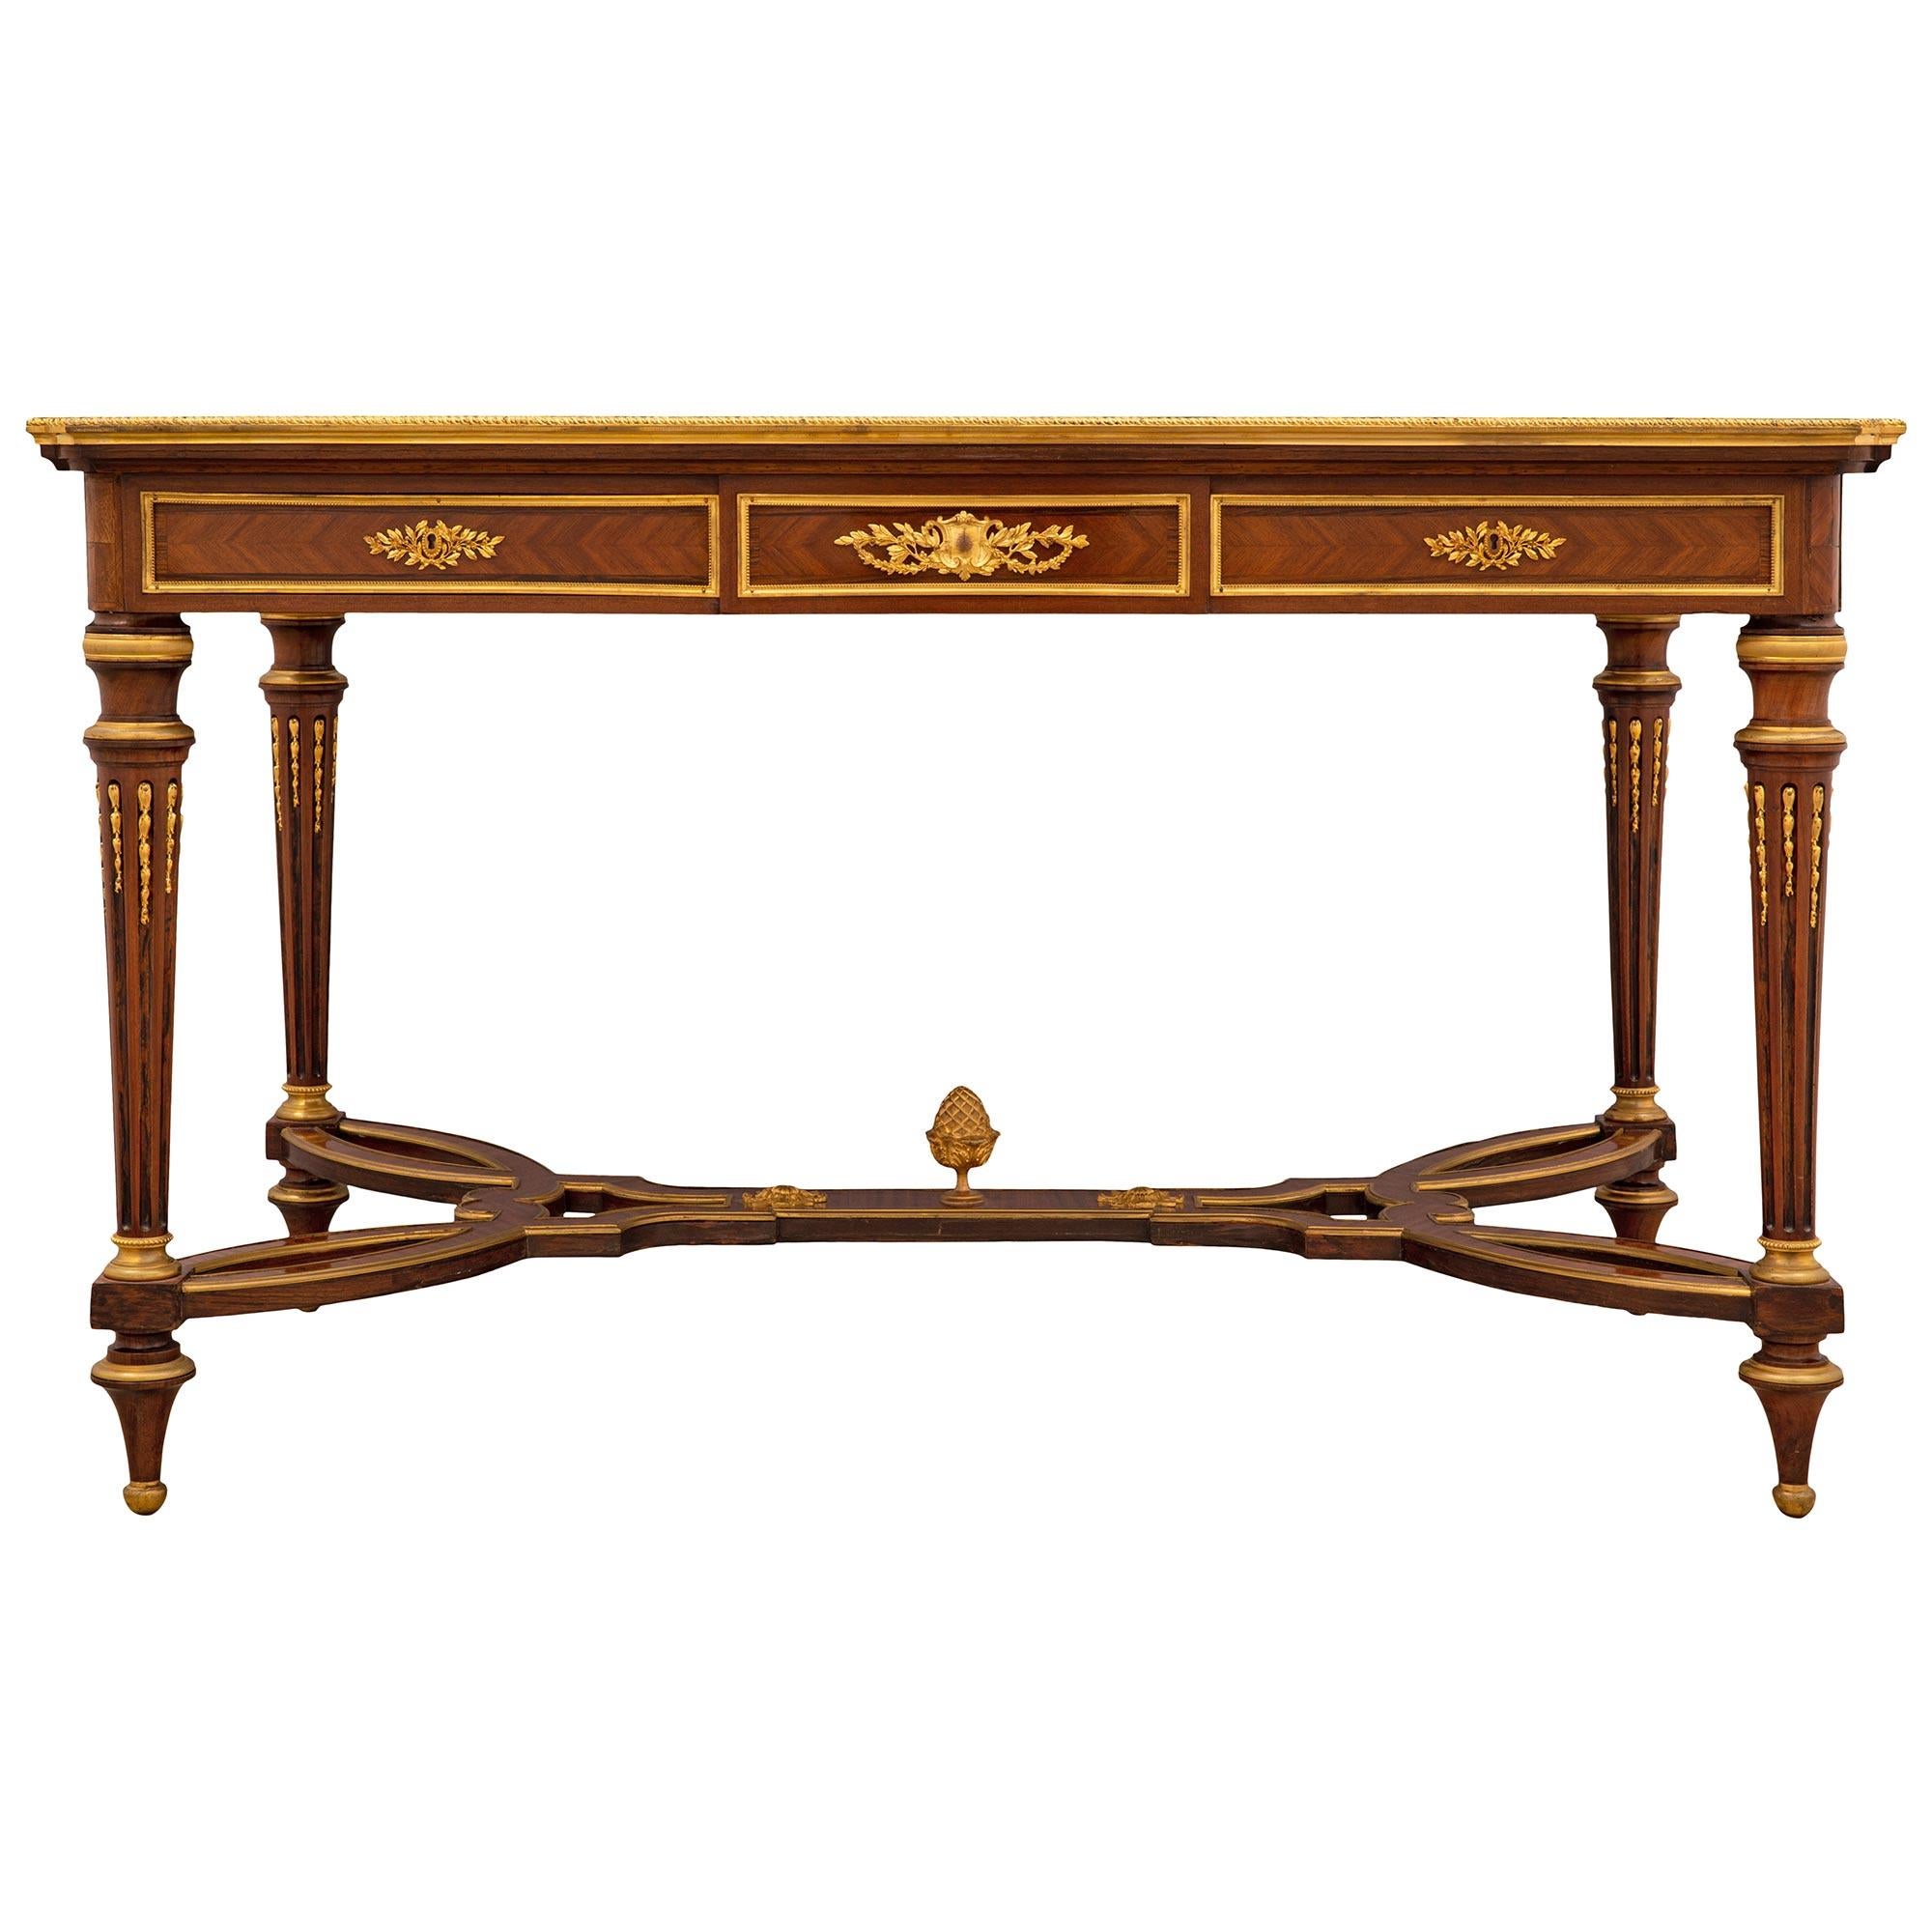 French 19th Century Louis XVI Style Tulipwood and Ormolu Center Table In Good Condition For Sale In West Palm Beach, FL